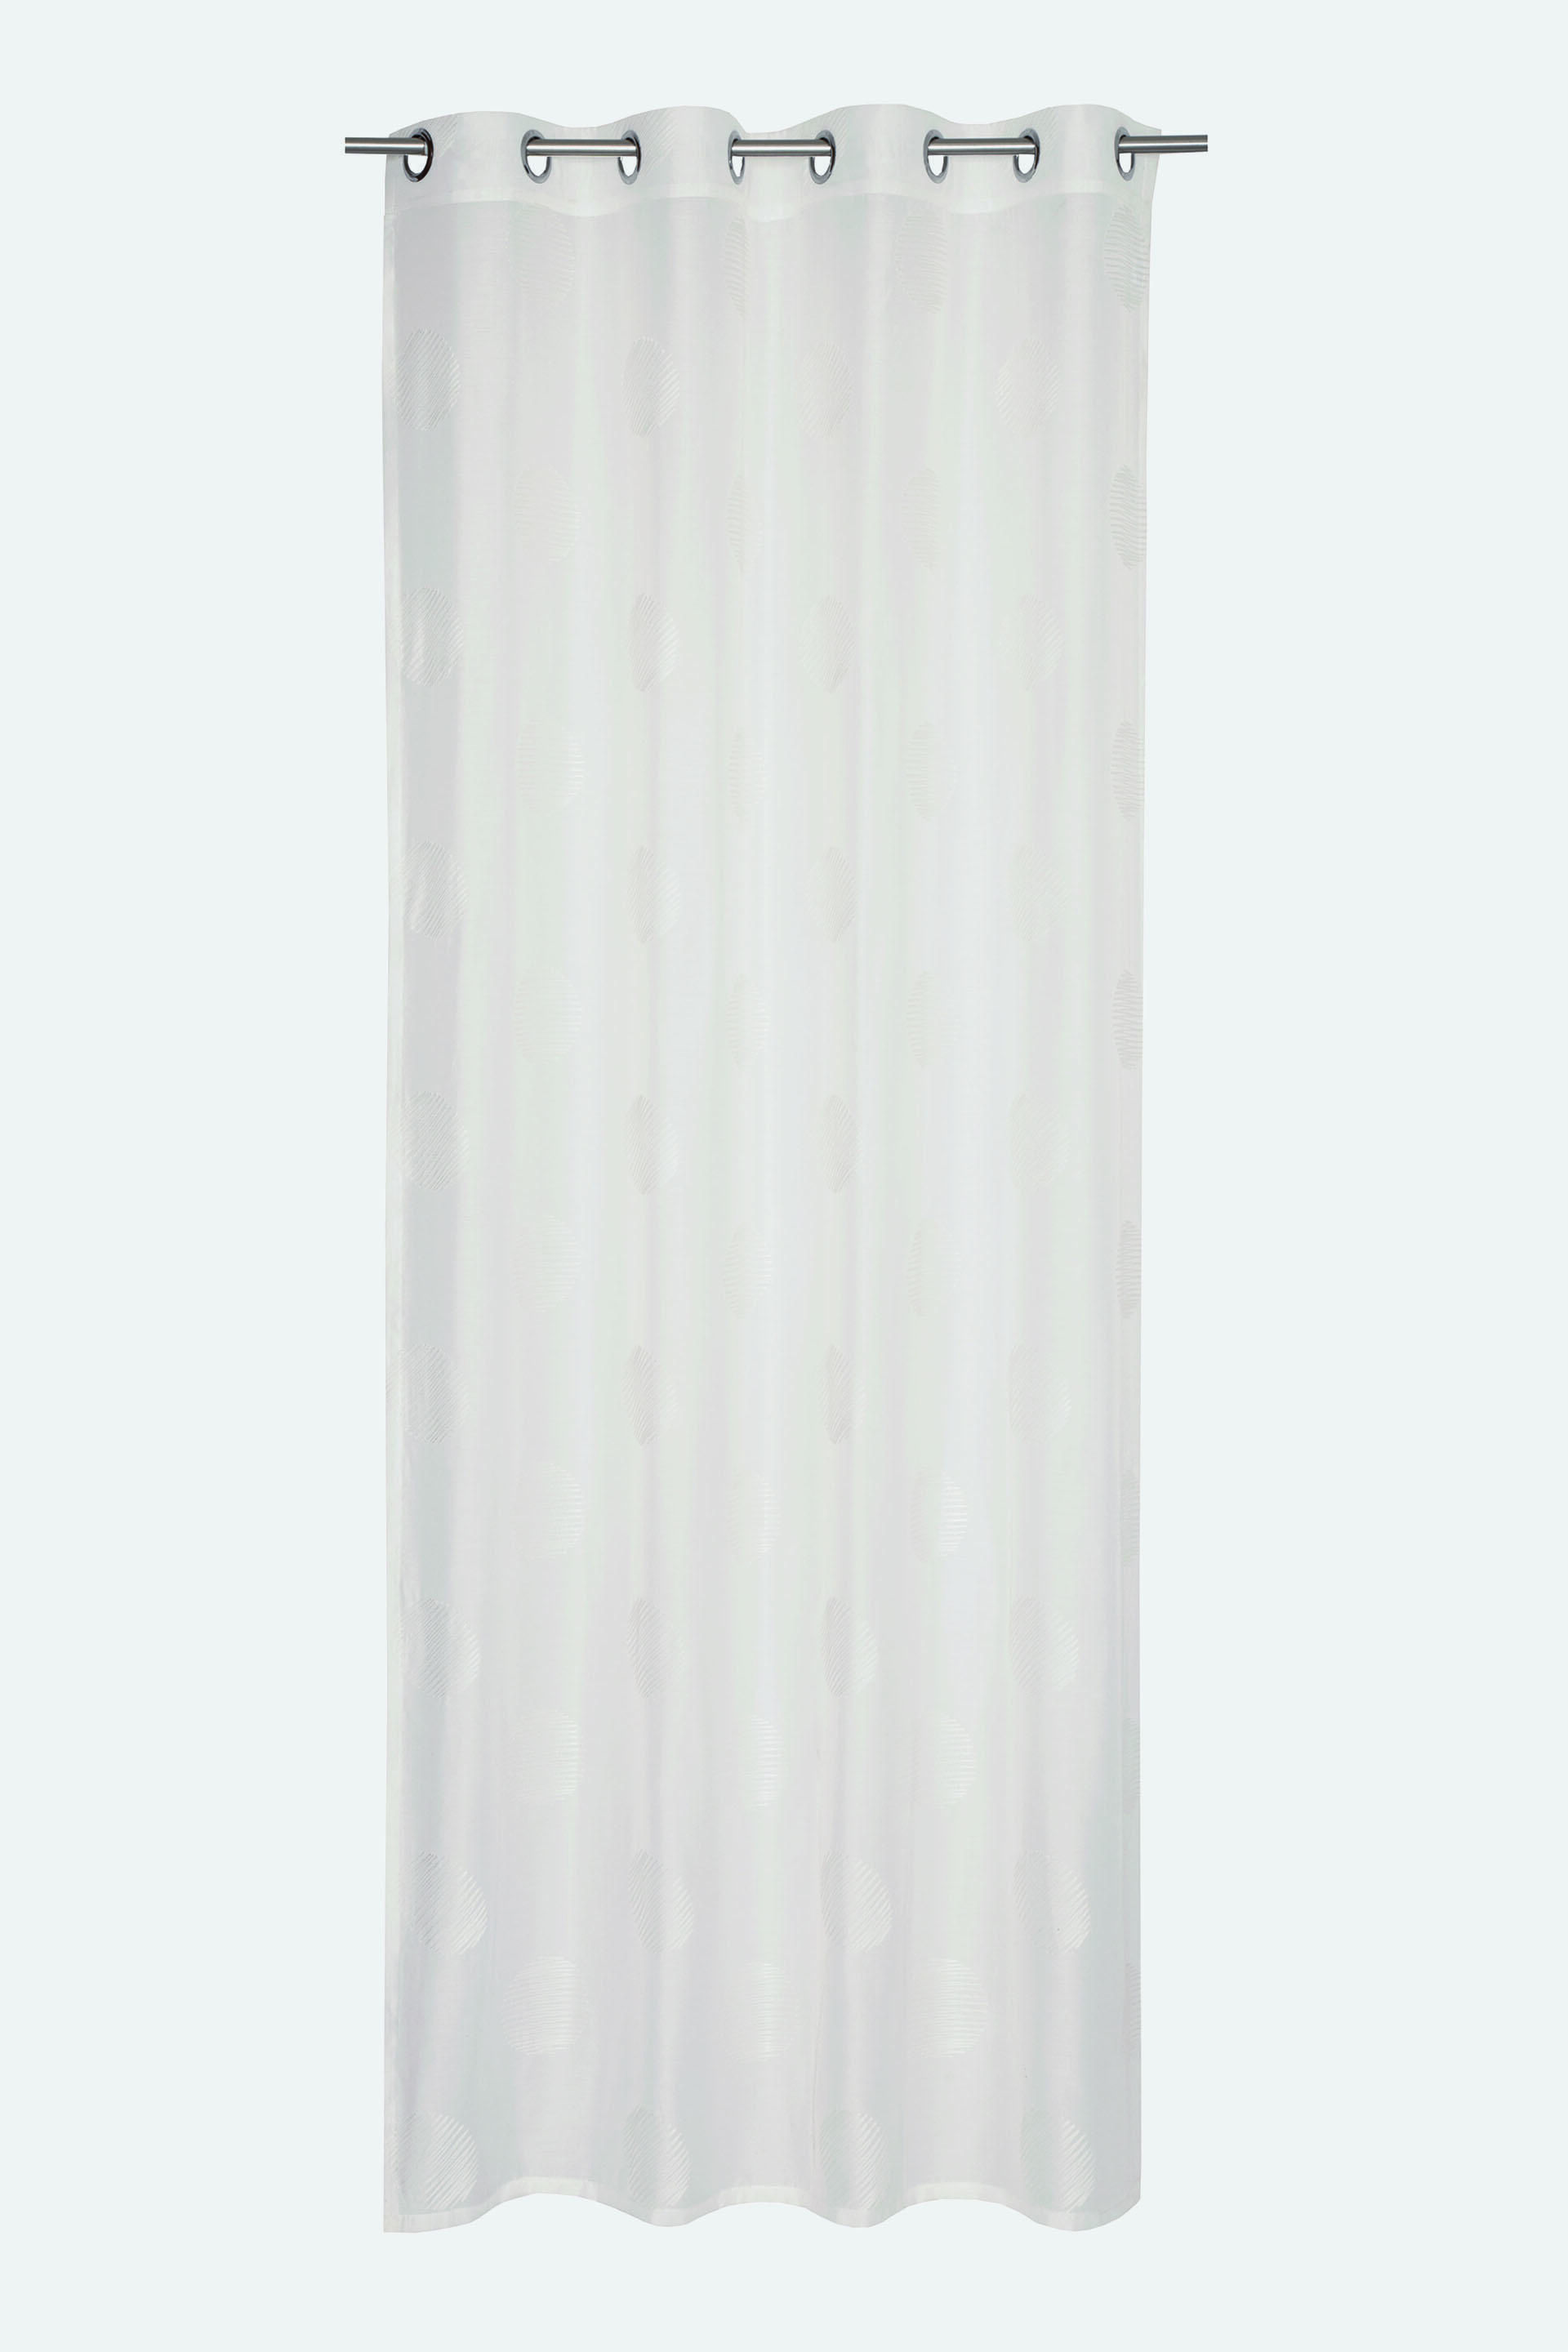 Esprit Sheer with curtain embroidery eyelet